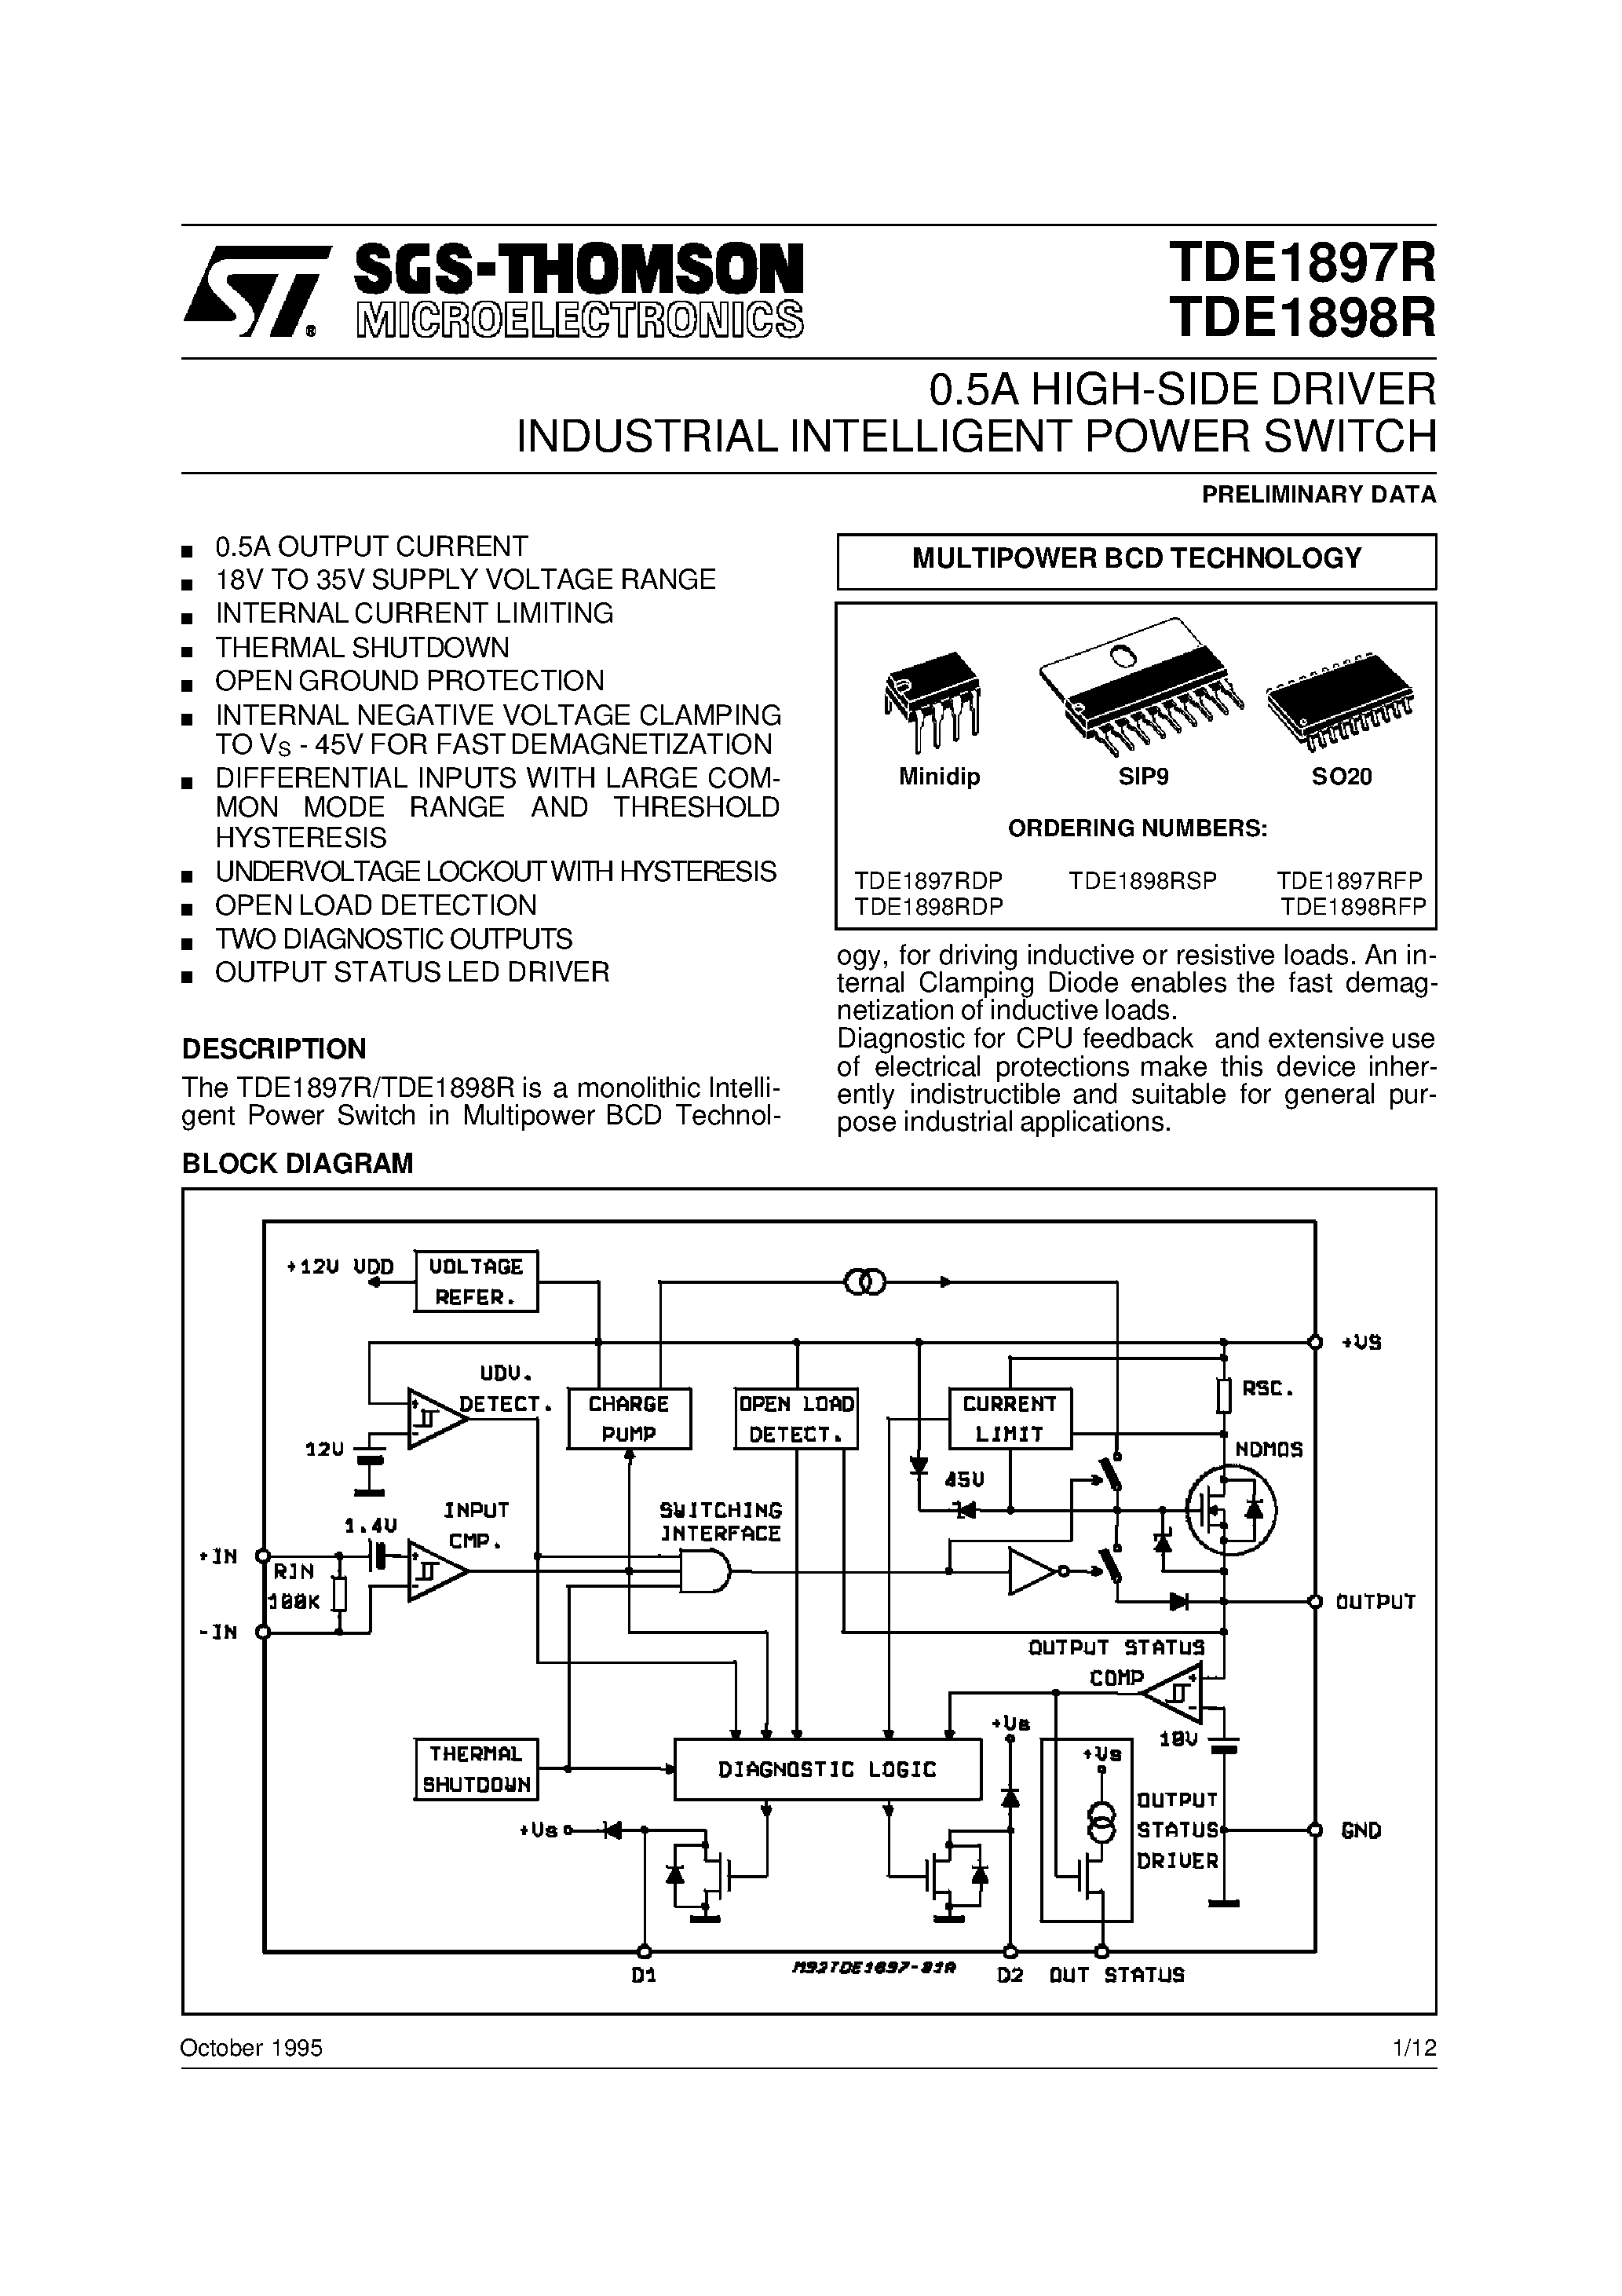 Даташит TDE1898R - 0.5A HIGH-SIDE DRIVER INDUSTRIAL INTELLIGENT POWER SWITCH страница 1